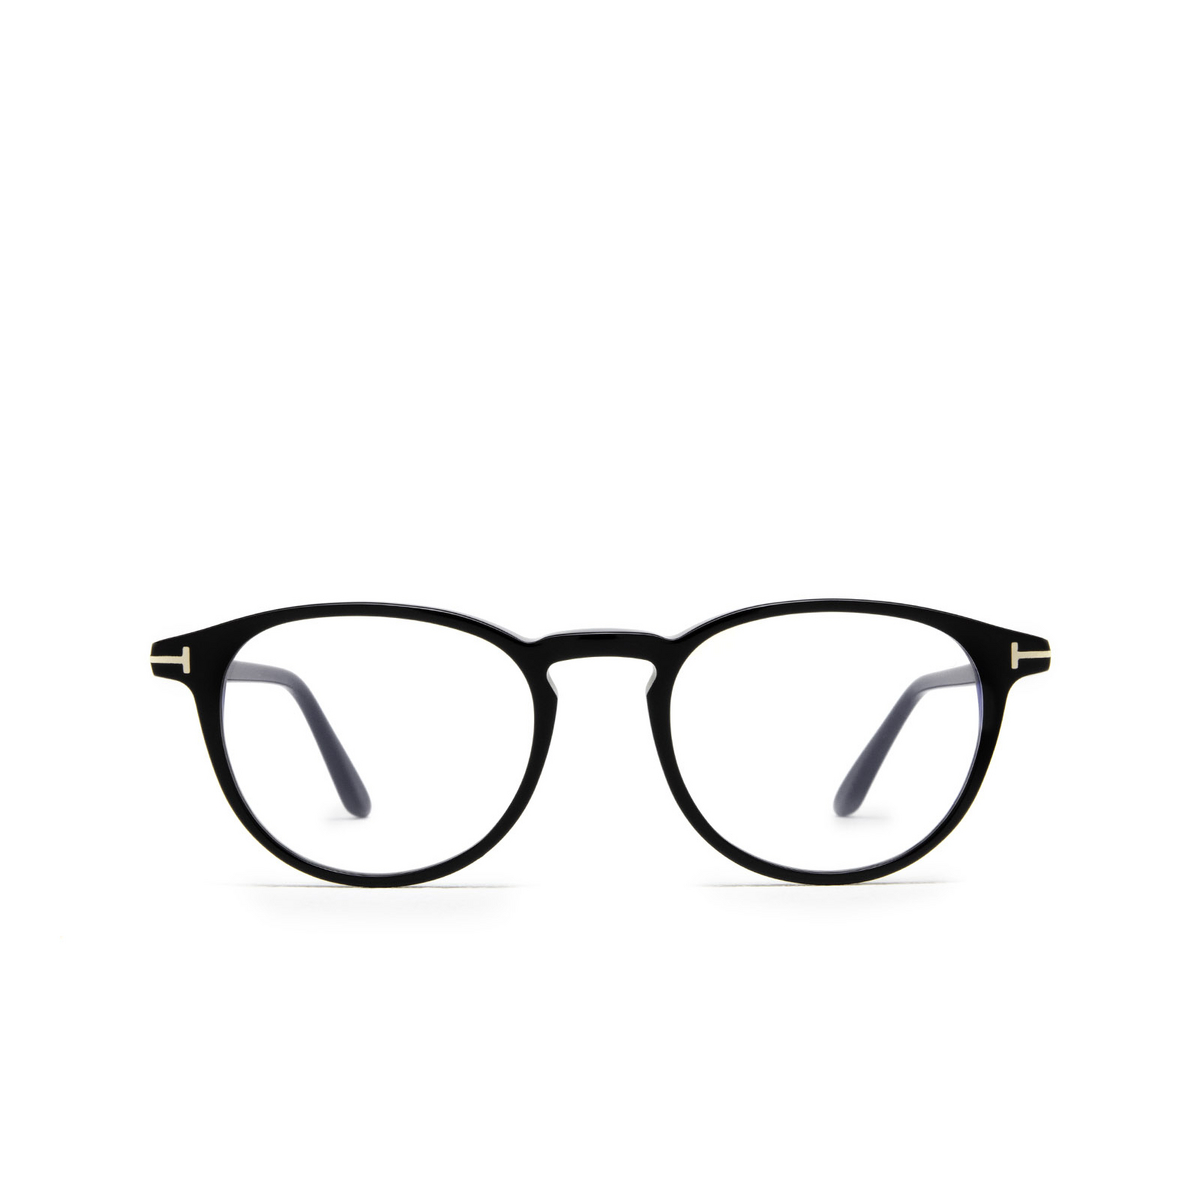 Tom Ford® Round Eyeglasses: FT5803-B color 001 Black - front view